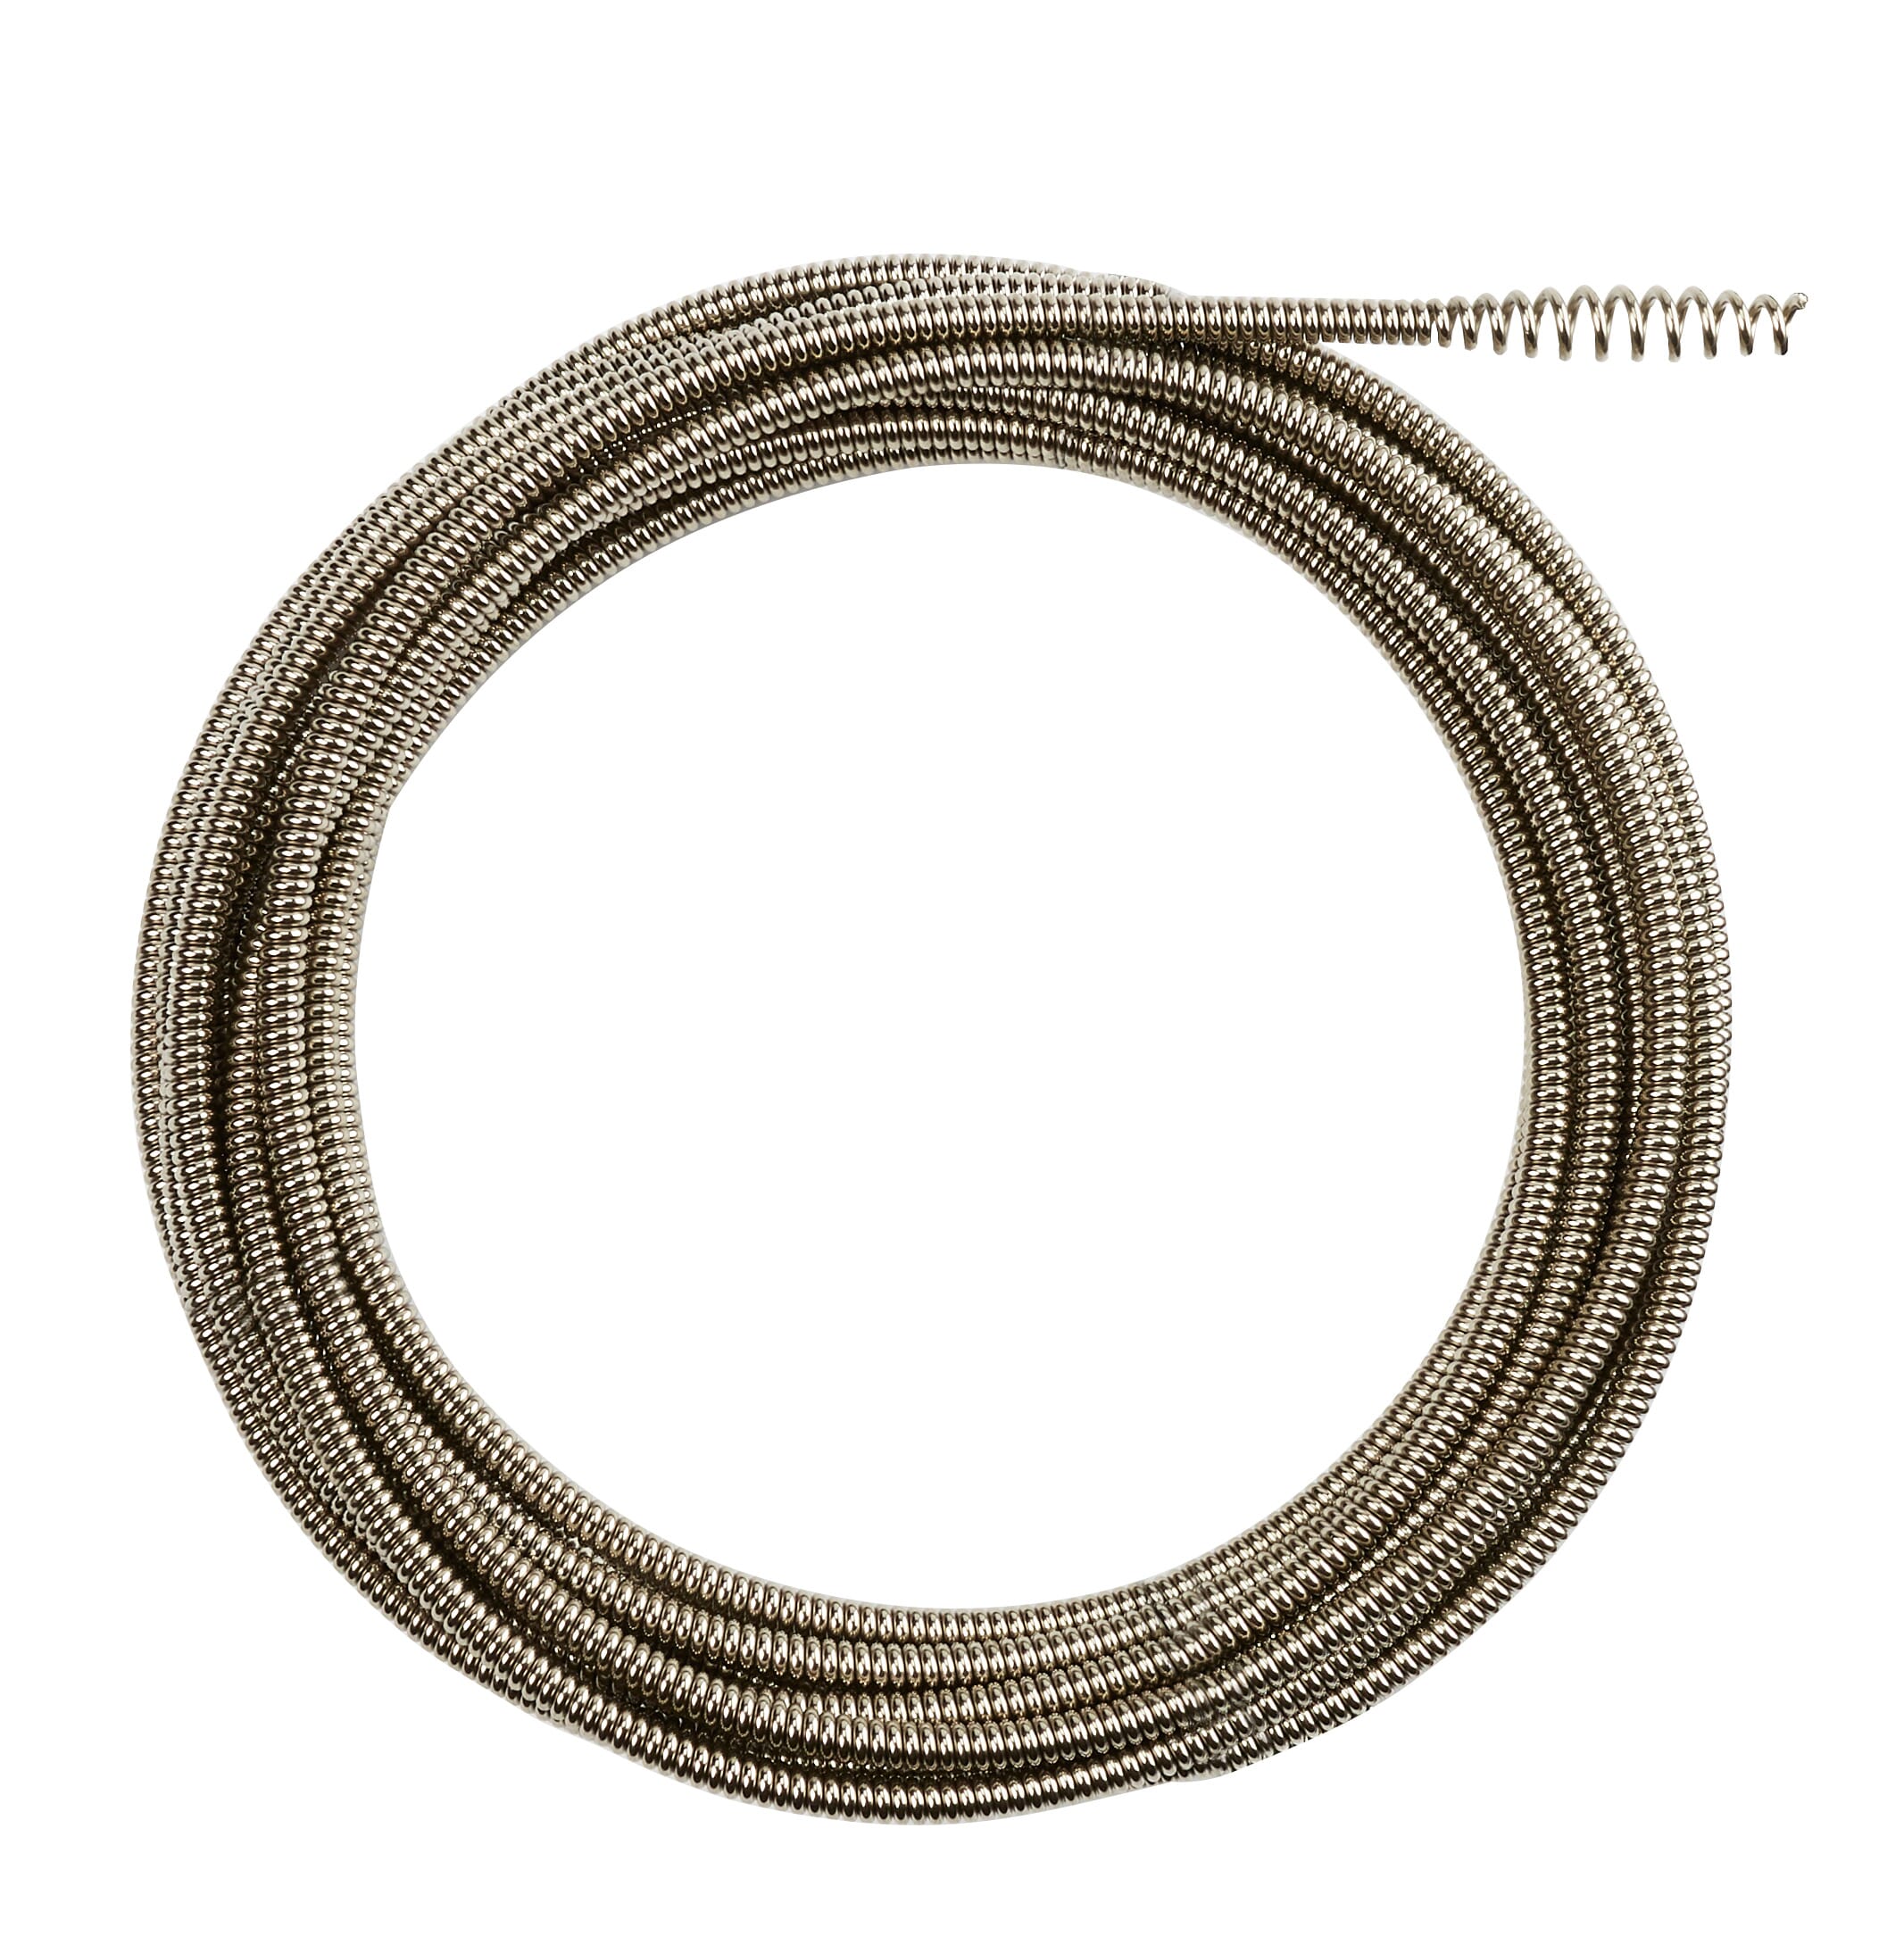 Milwaukee® 48-53-2563 Inner Core Bulb Head Drain Cleaning Cable, 1/4 in, Steel, For Use With Drain Cleaning Machines, 1-1/4 to 2-1/2 in Drain Line